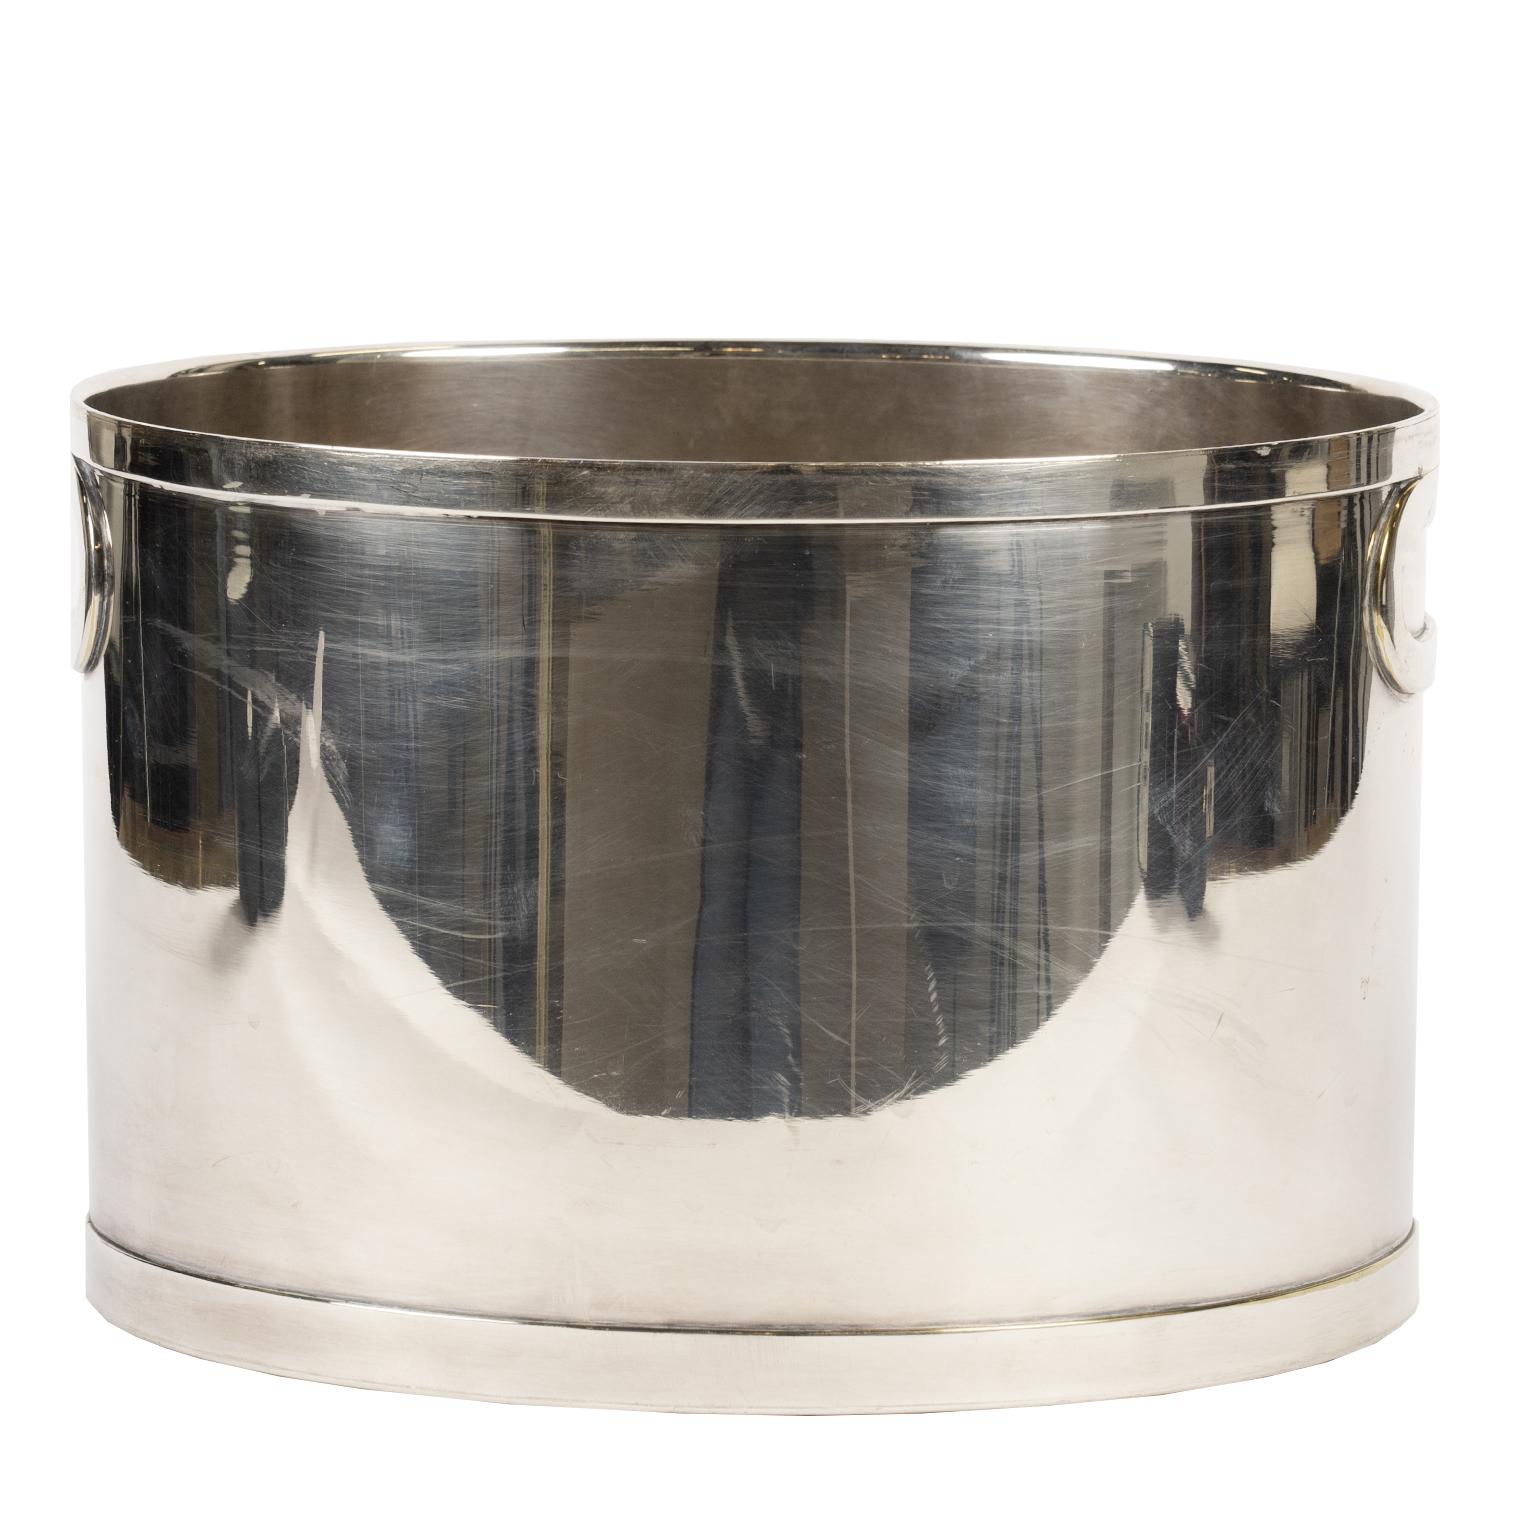 This is a very cool double bottle oval champagne bucket stamped Egidio Broggi Milano on the underside. What is special about this wine cooler is the minimalist, almost understated,design with its low profile handle on either side and the narrow